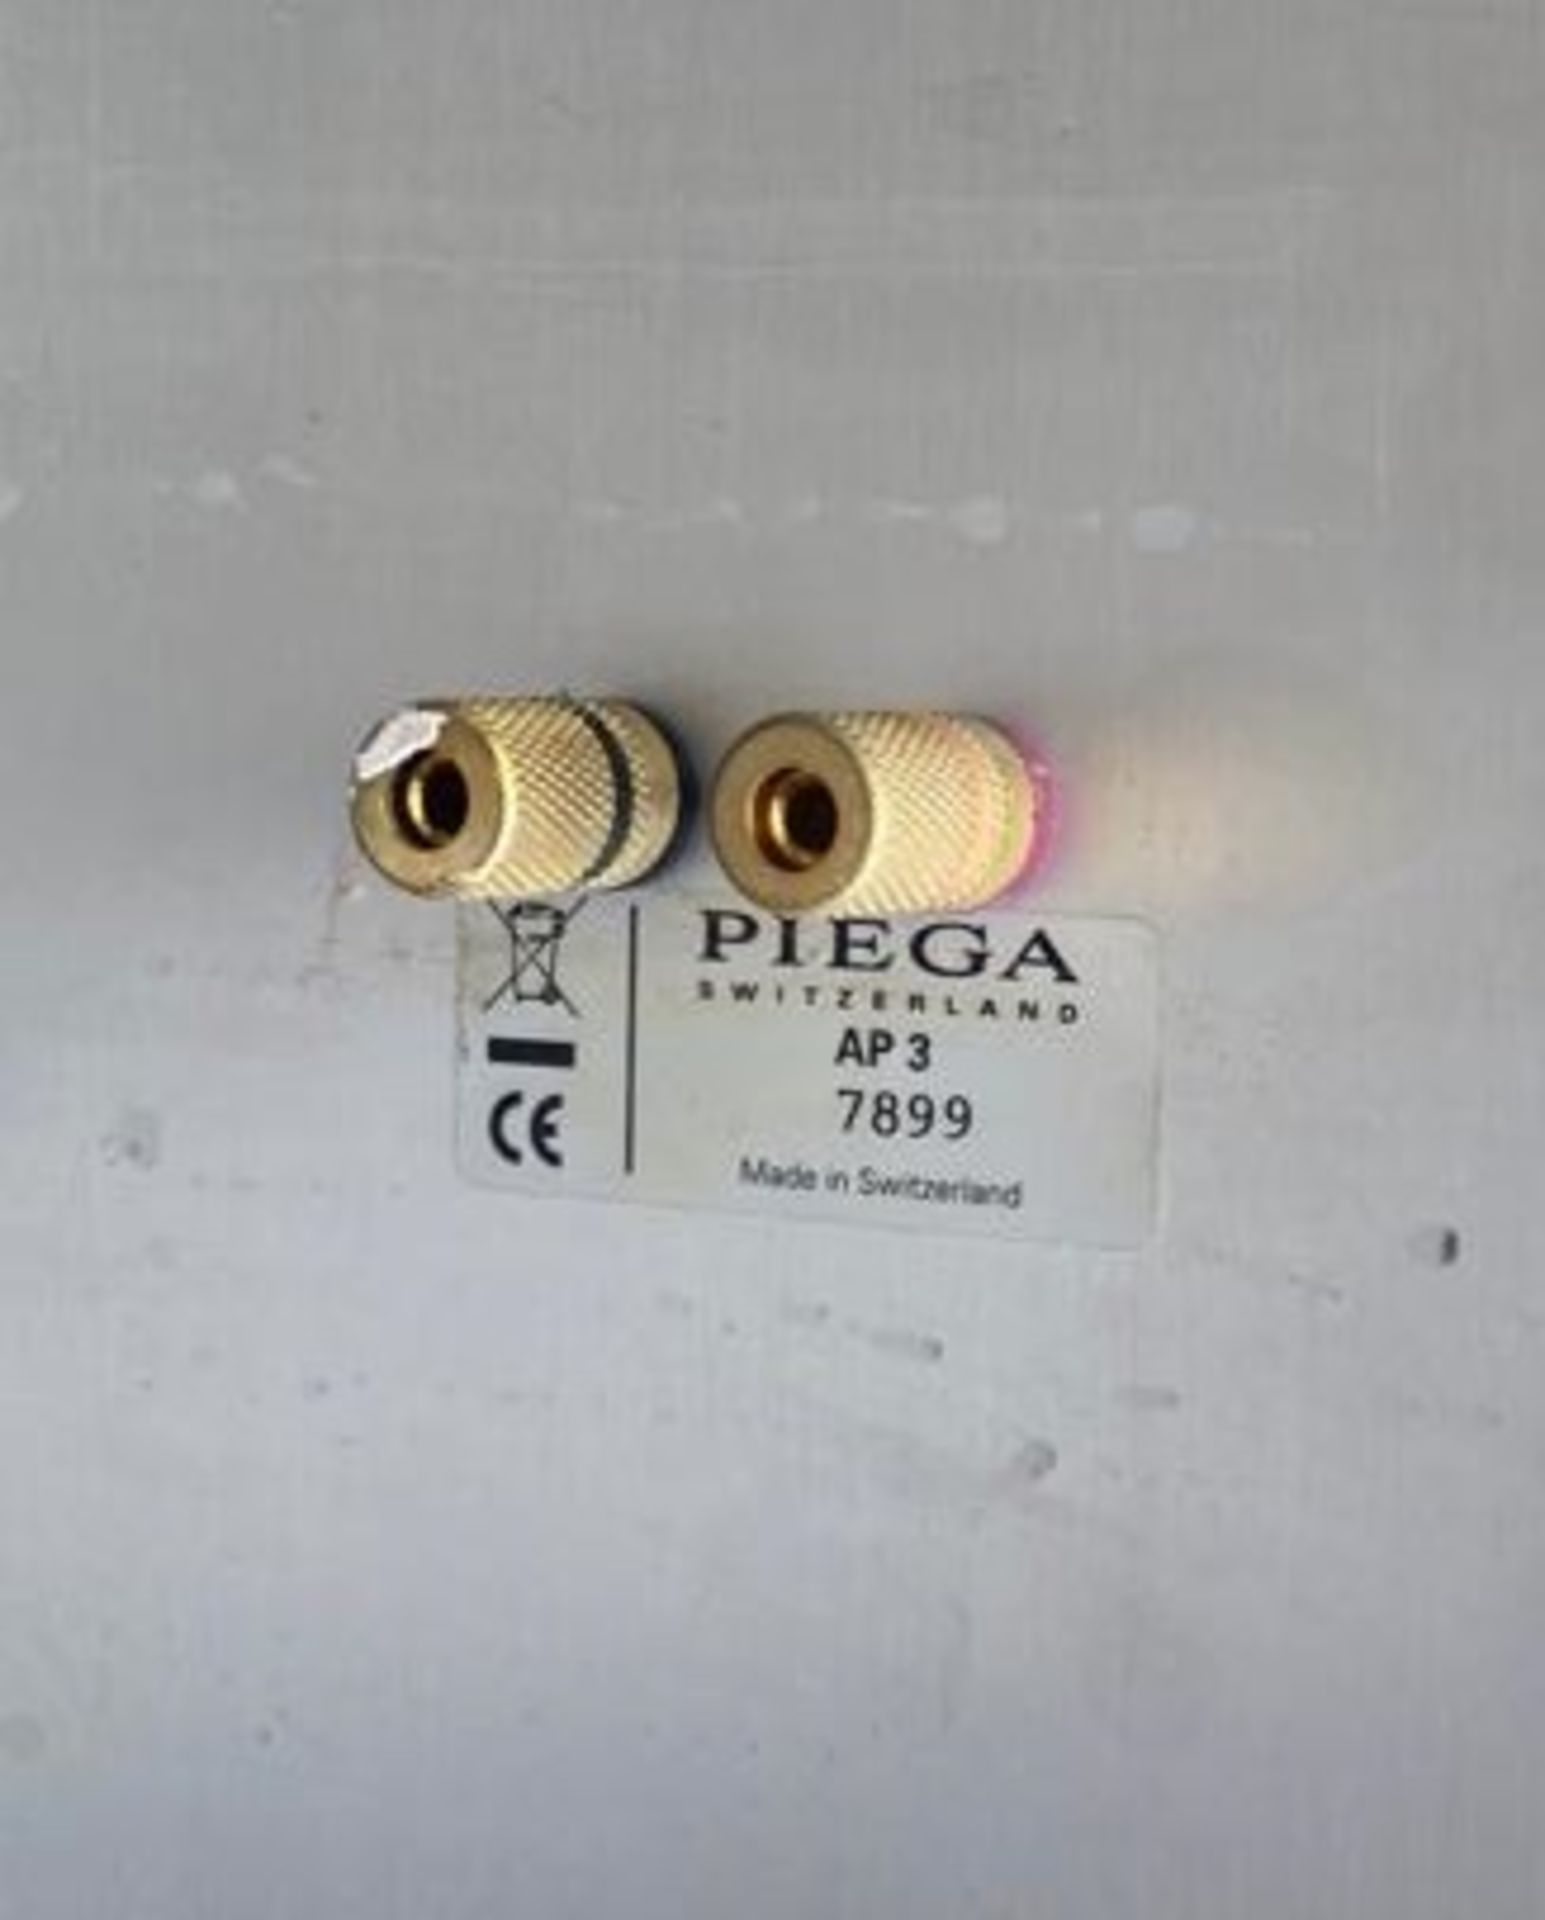 4 x Piega AP3 Wall Mounted 150w Speakers - Dimensions (mm): 420x200x250 - Image 2 of 2